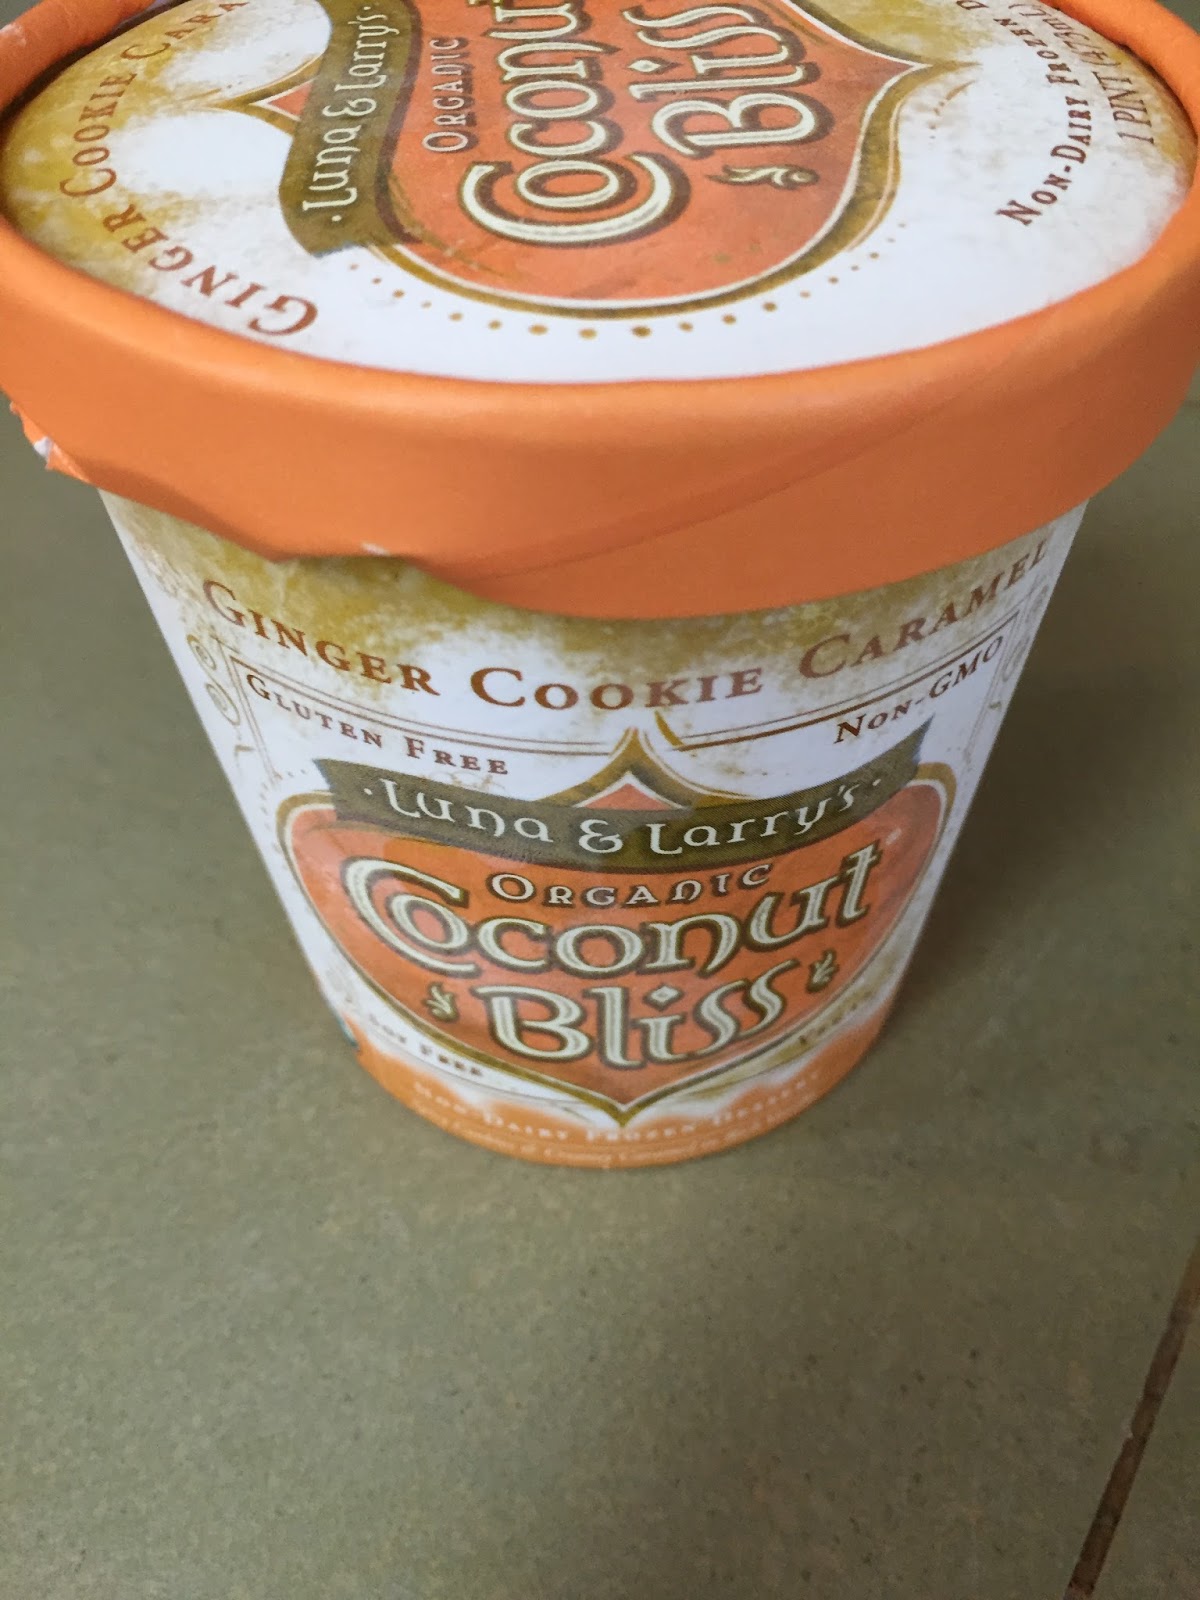 Luna & Larry's Organic Coconut Bliss Ginger Cookie Caramel